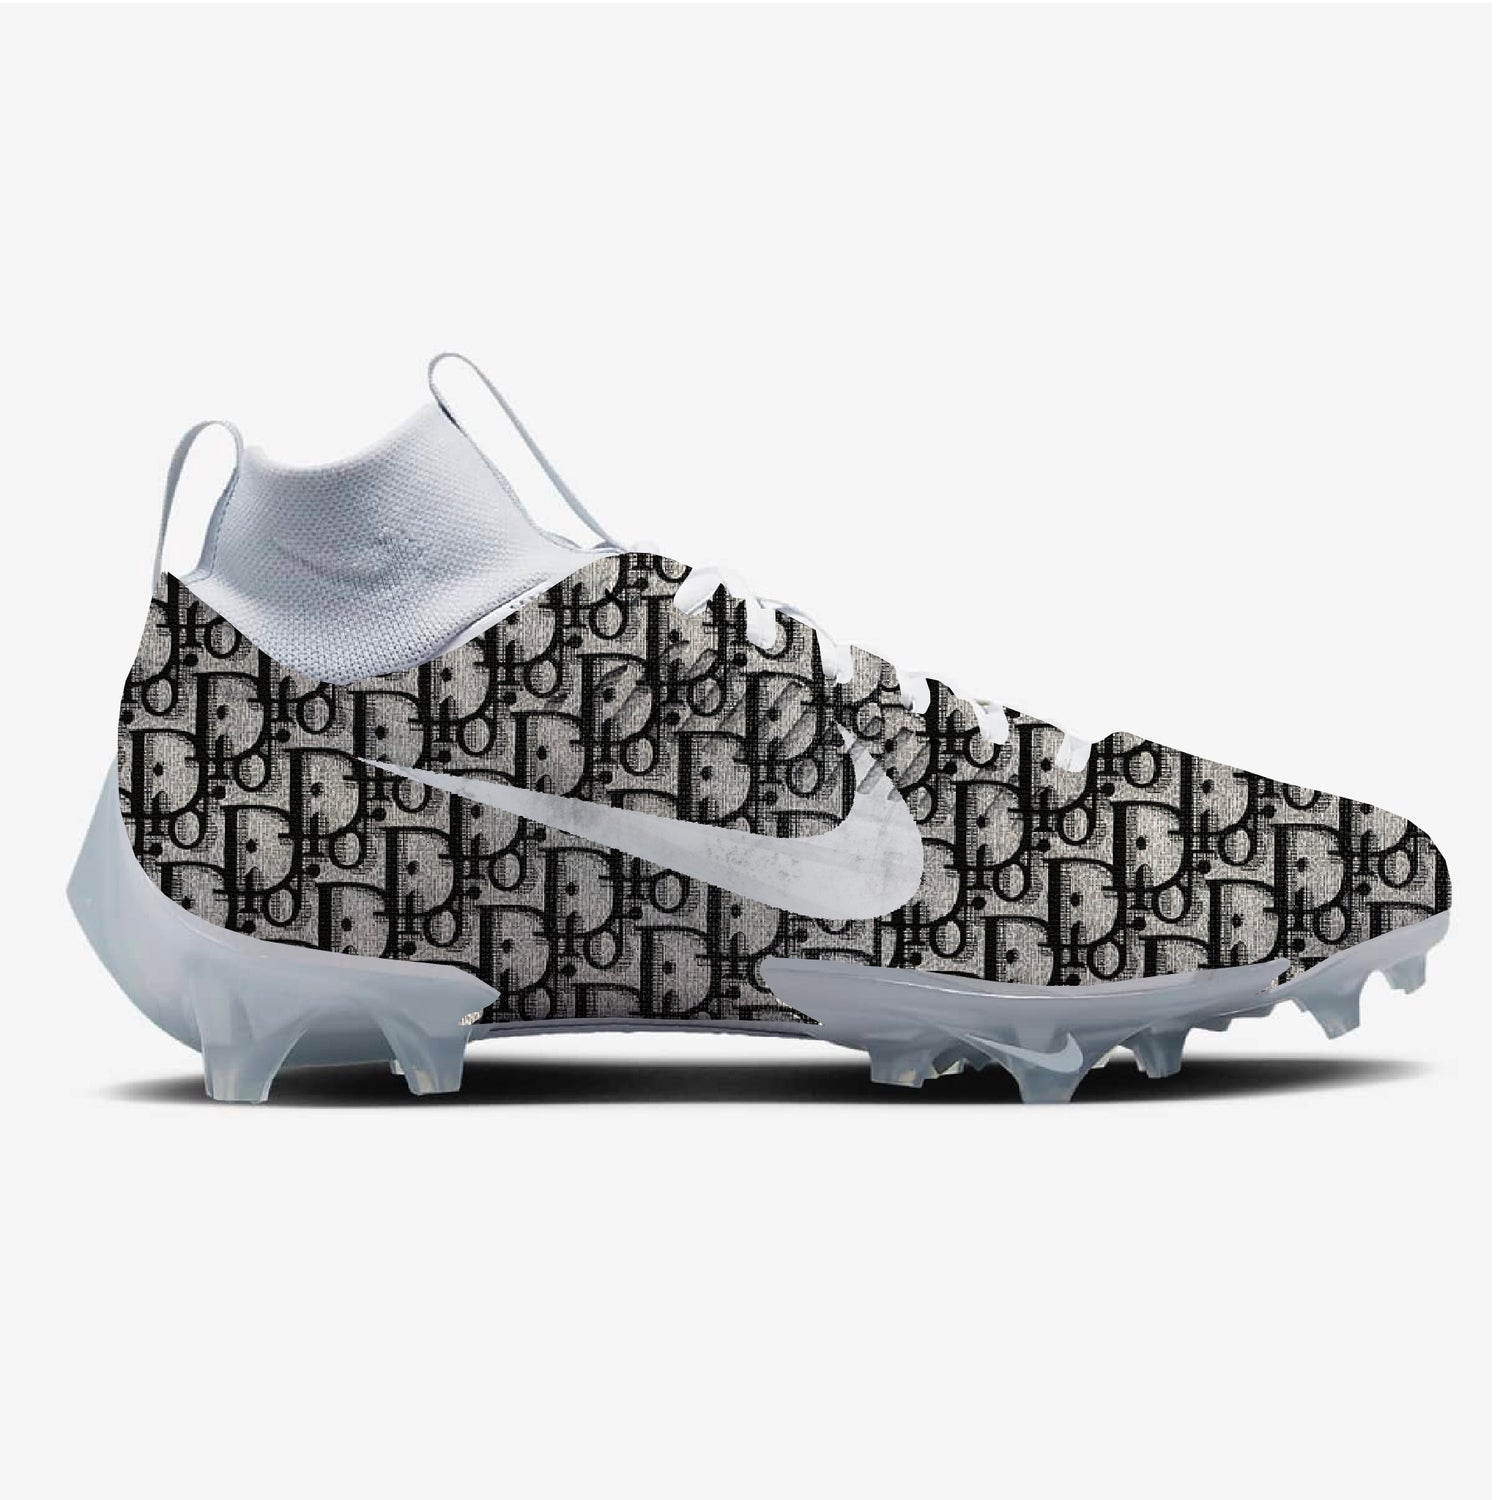 Dior Material Nike Football Cleats